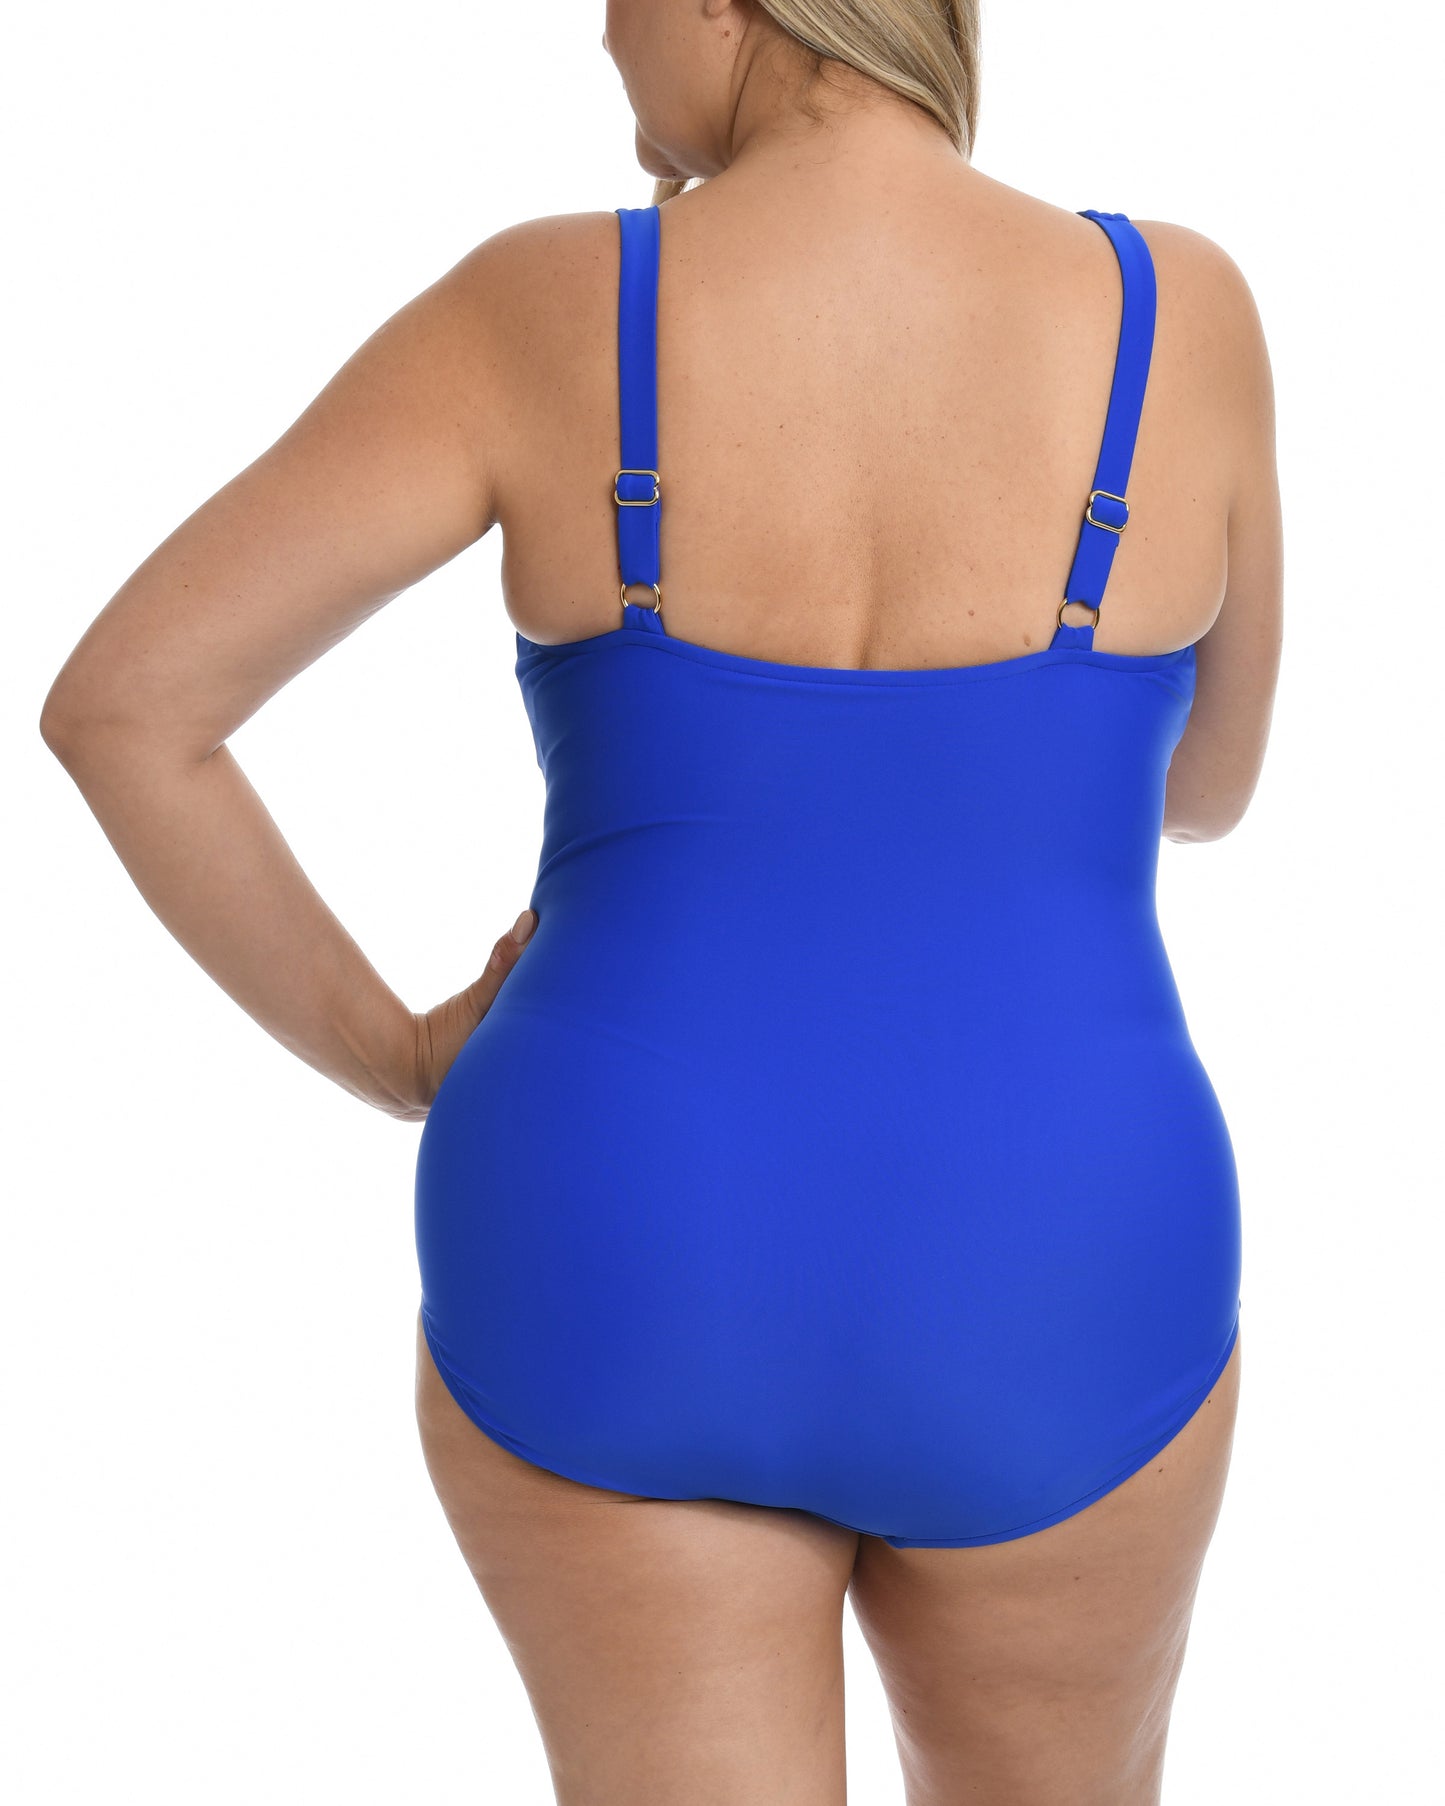 Model wearing a one piece swimsuit with a twist detail in cobalt